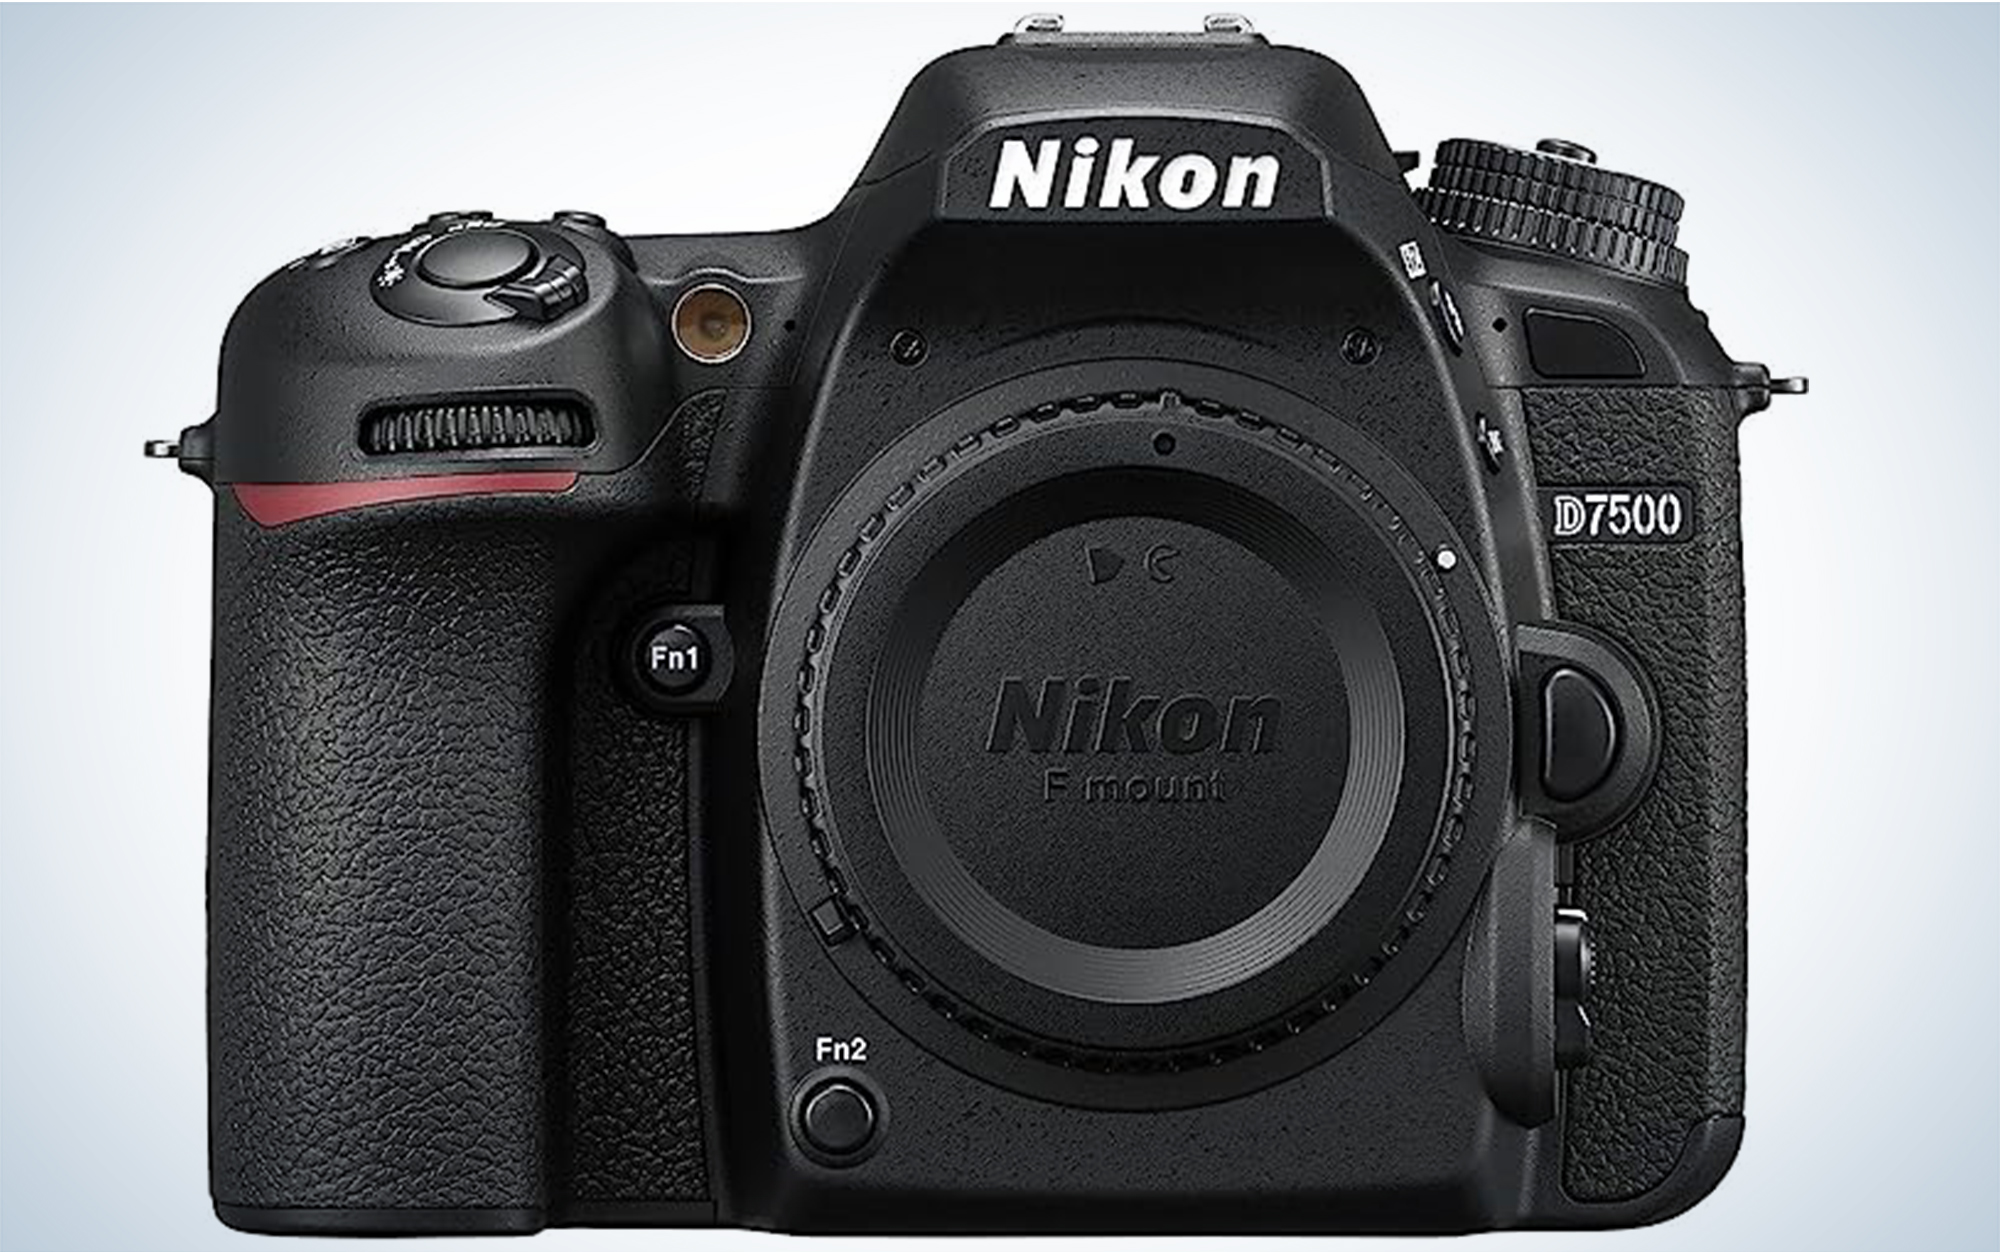 The Nikon D7500 is one of the best cameras for wildlife photography.